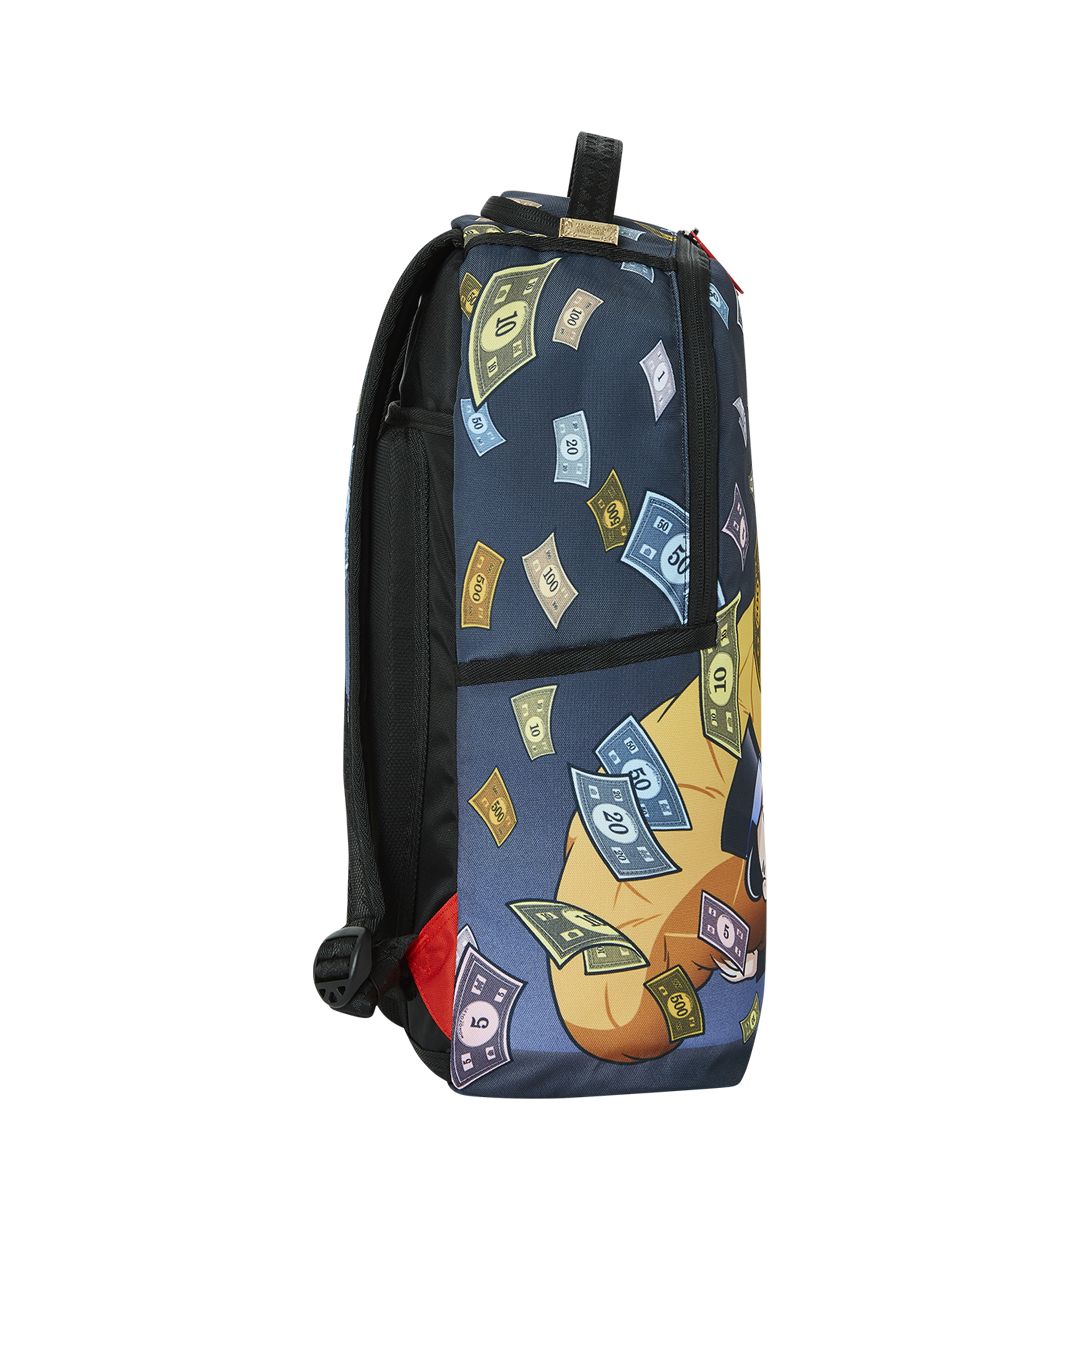 Sprayground Monopoly heavy bags backpack